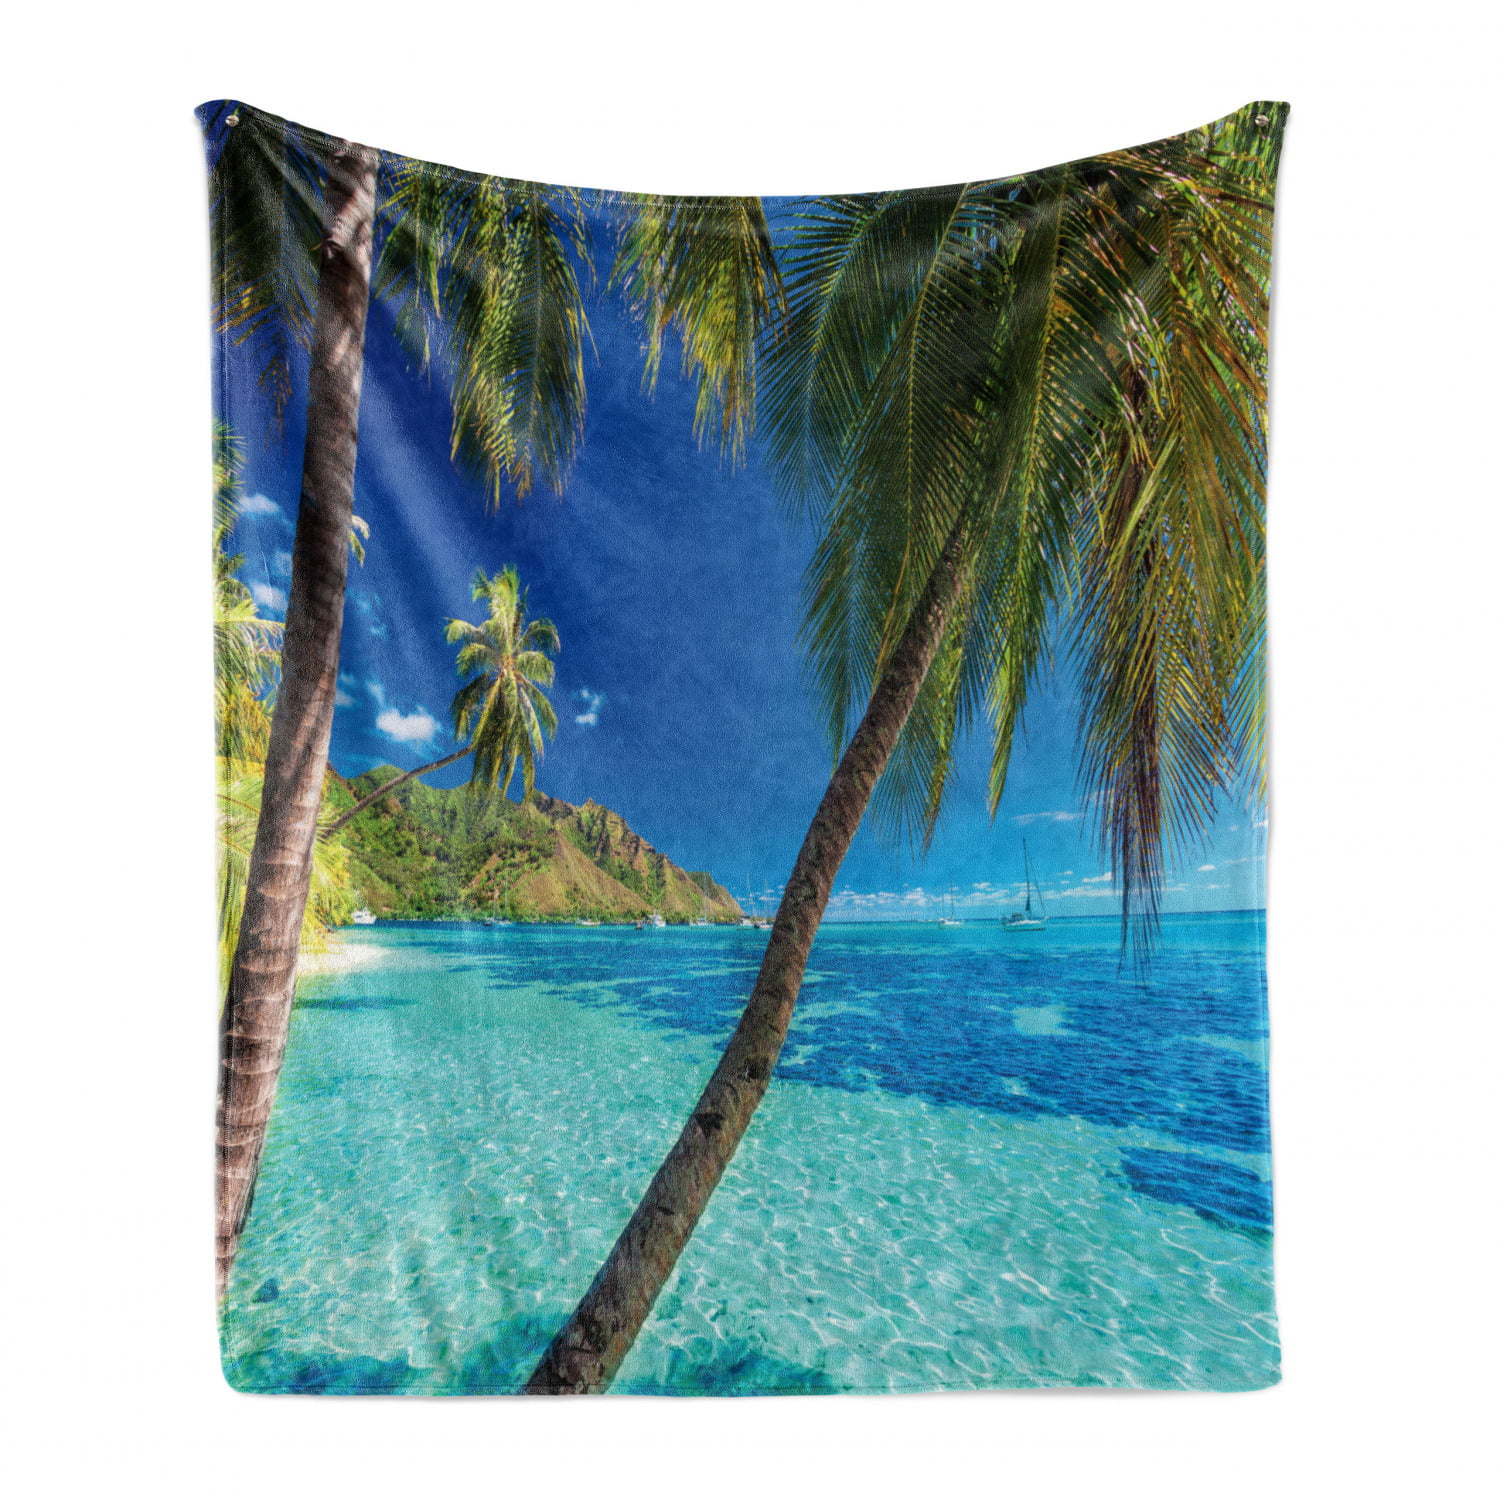 Ambesonne Tropical Soft Flannel Fleece Throw Blanket Cozy Plush for Indoor and Outdoor Use Aqua Green Exotic Beach with Coconut Palm Trees and Rocks Journey Oceanic Coastal Design 60 x 80